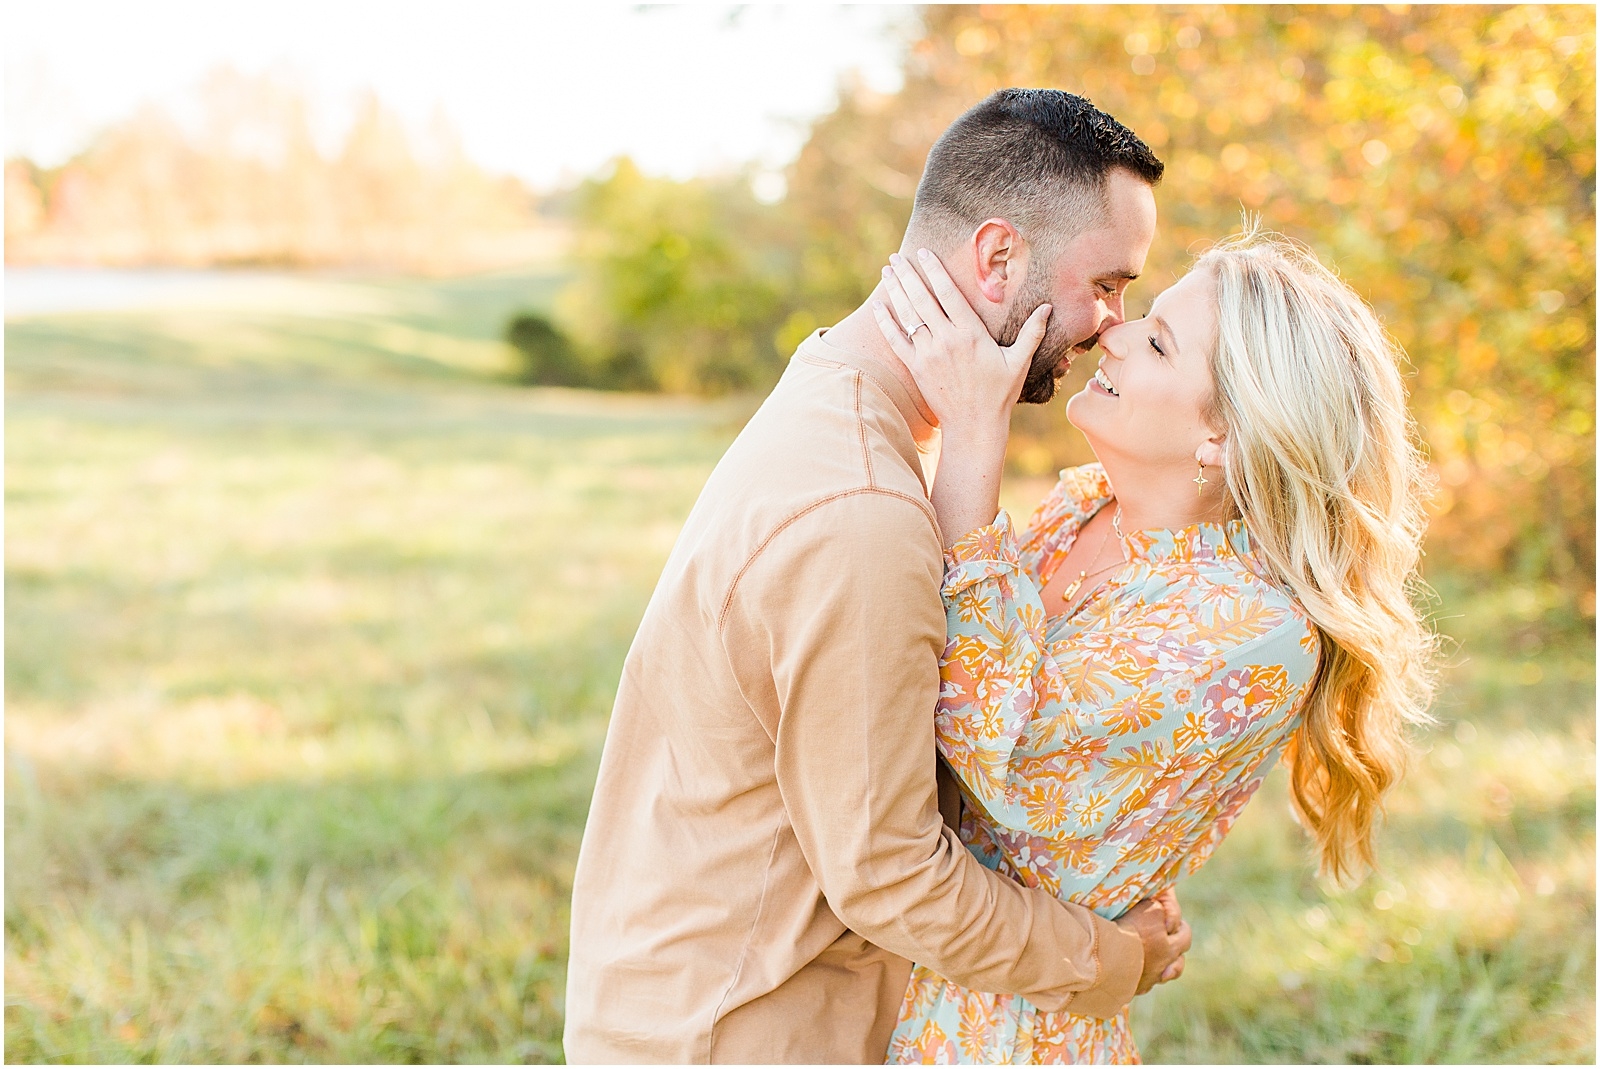 A Southern Indiana Engagement Session | Charleston and Erin | Bret and Brandie Photography007.jpg